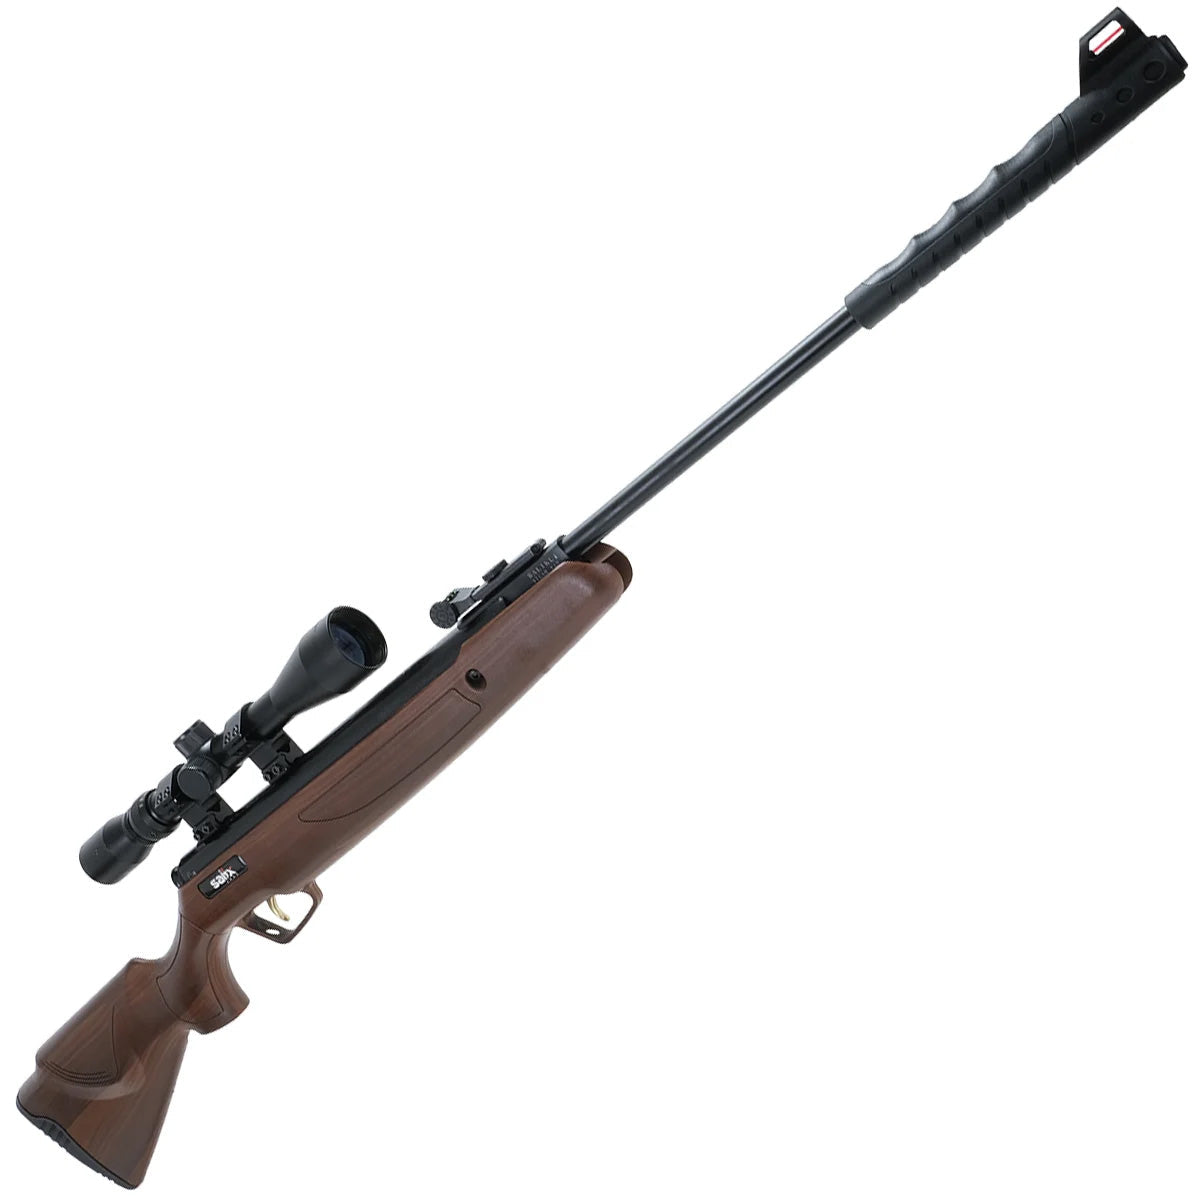 SALIX, TRIMEX ARMS TX02 BREAK BARREL SPRING AIR RIFLE WITH SYNTHETIC WOOD LOOK STOCK .177